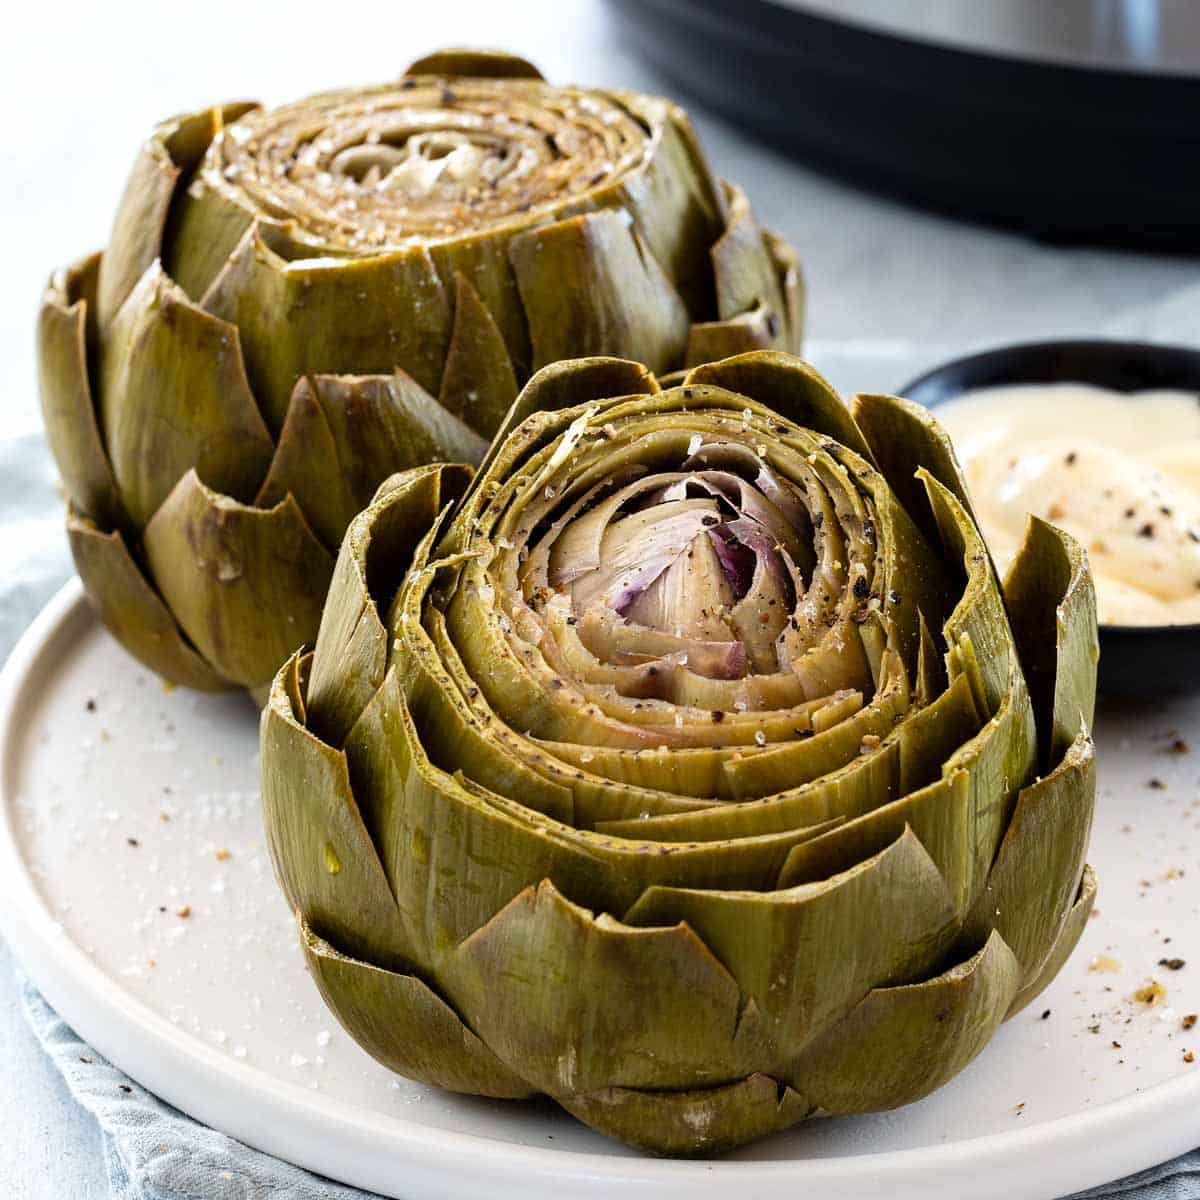 Here is All You Need to Know About Artichokes- How to Cook Them and Their Amazing Benefits